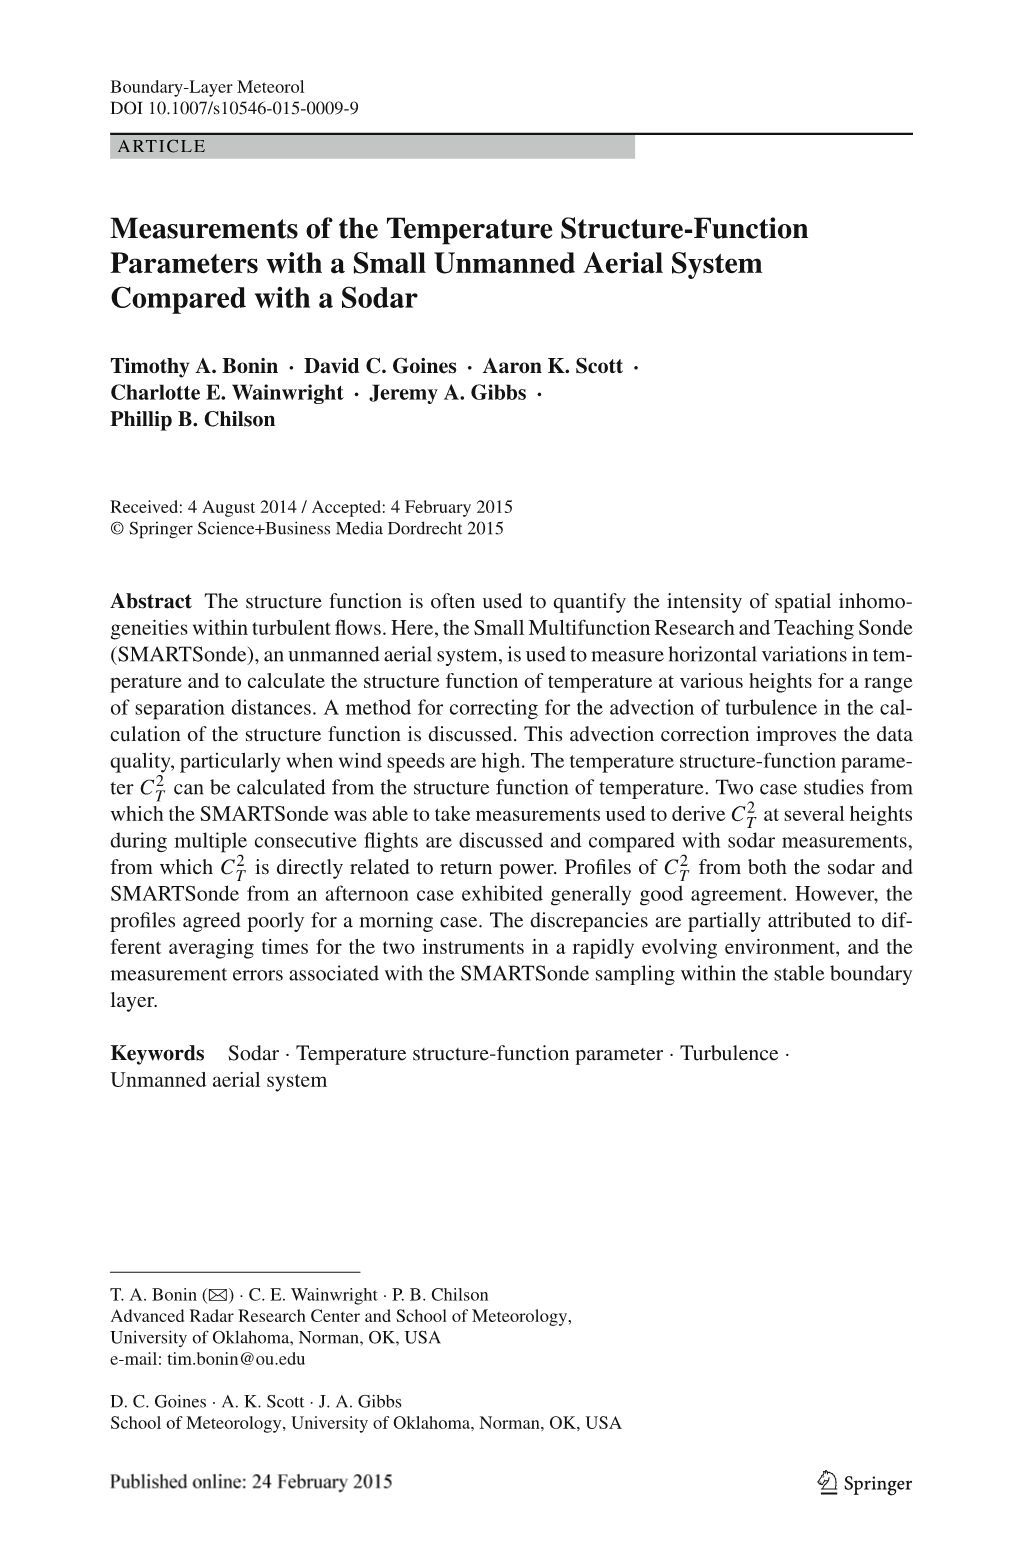 Measurements of the Temperature Structure-Function Parameters with a Small Unmanned Aerial System Compared with a Sodar